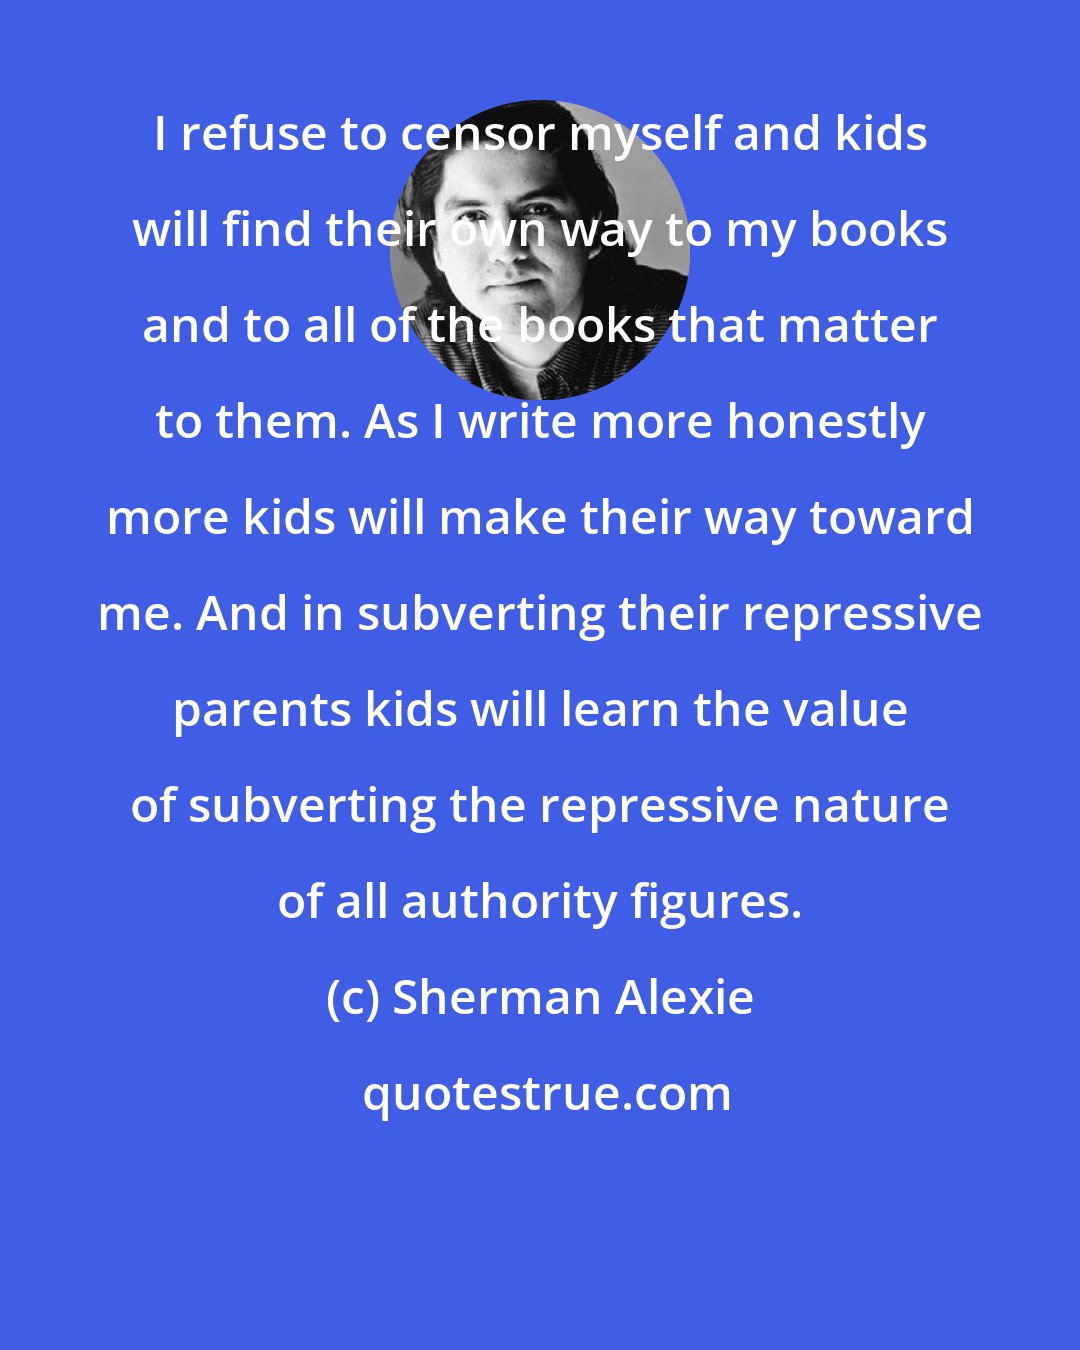 Sherman Alexie: I refuse to censor myself and kids will find their own way to my books and to all of the books that matter to them. As I write more honestly more kids will make their way toward me. And in subverting their repressive parents kids will learn the value of subverting the repressive nature of all authority figures.